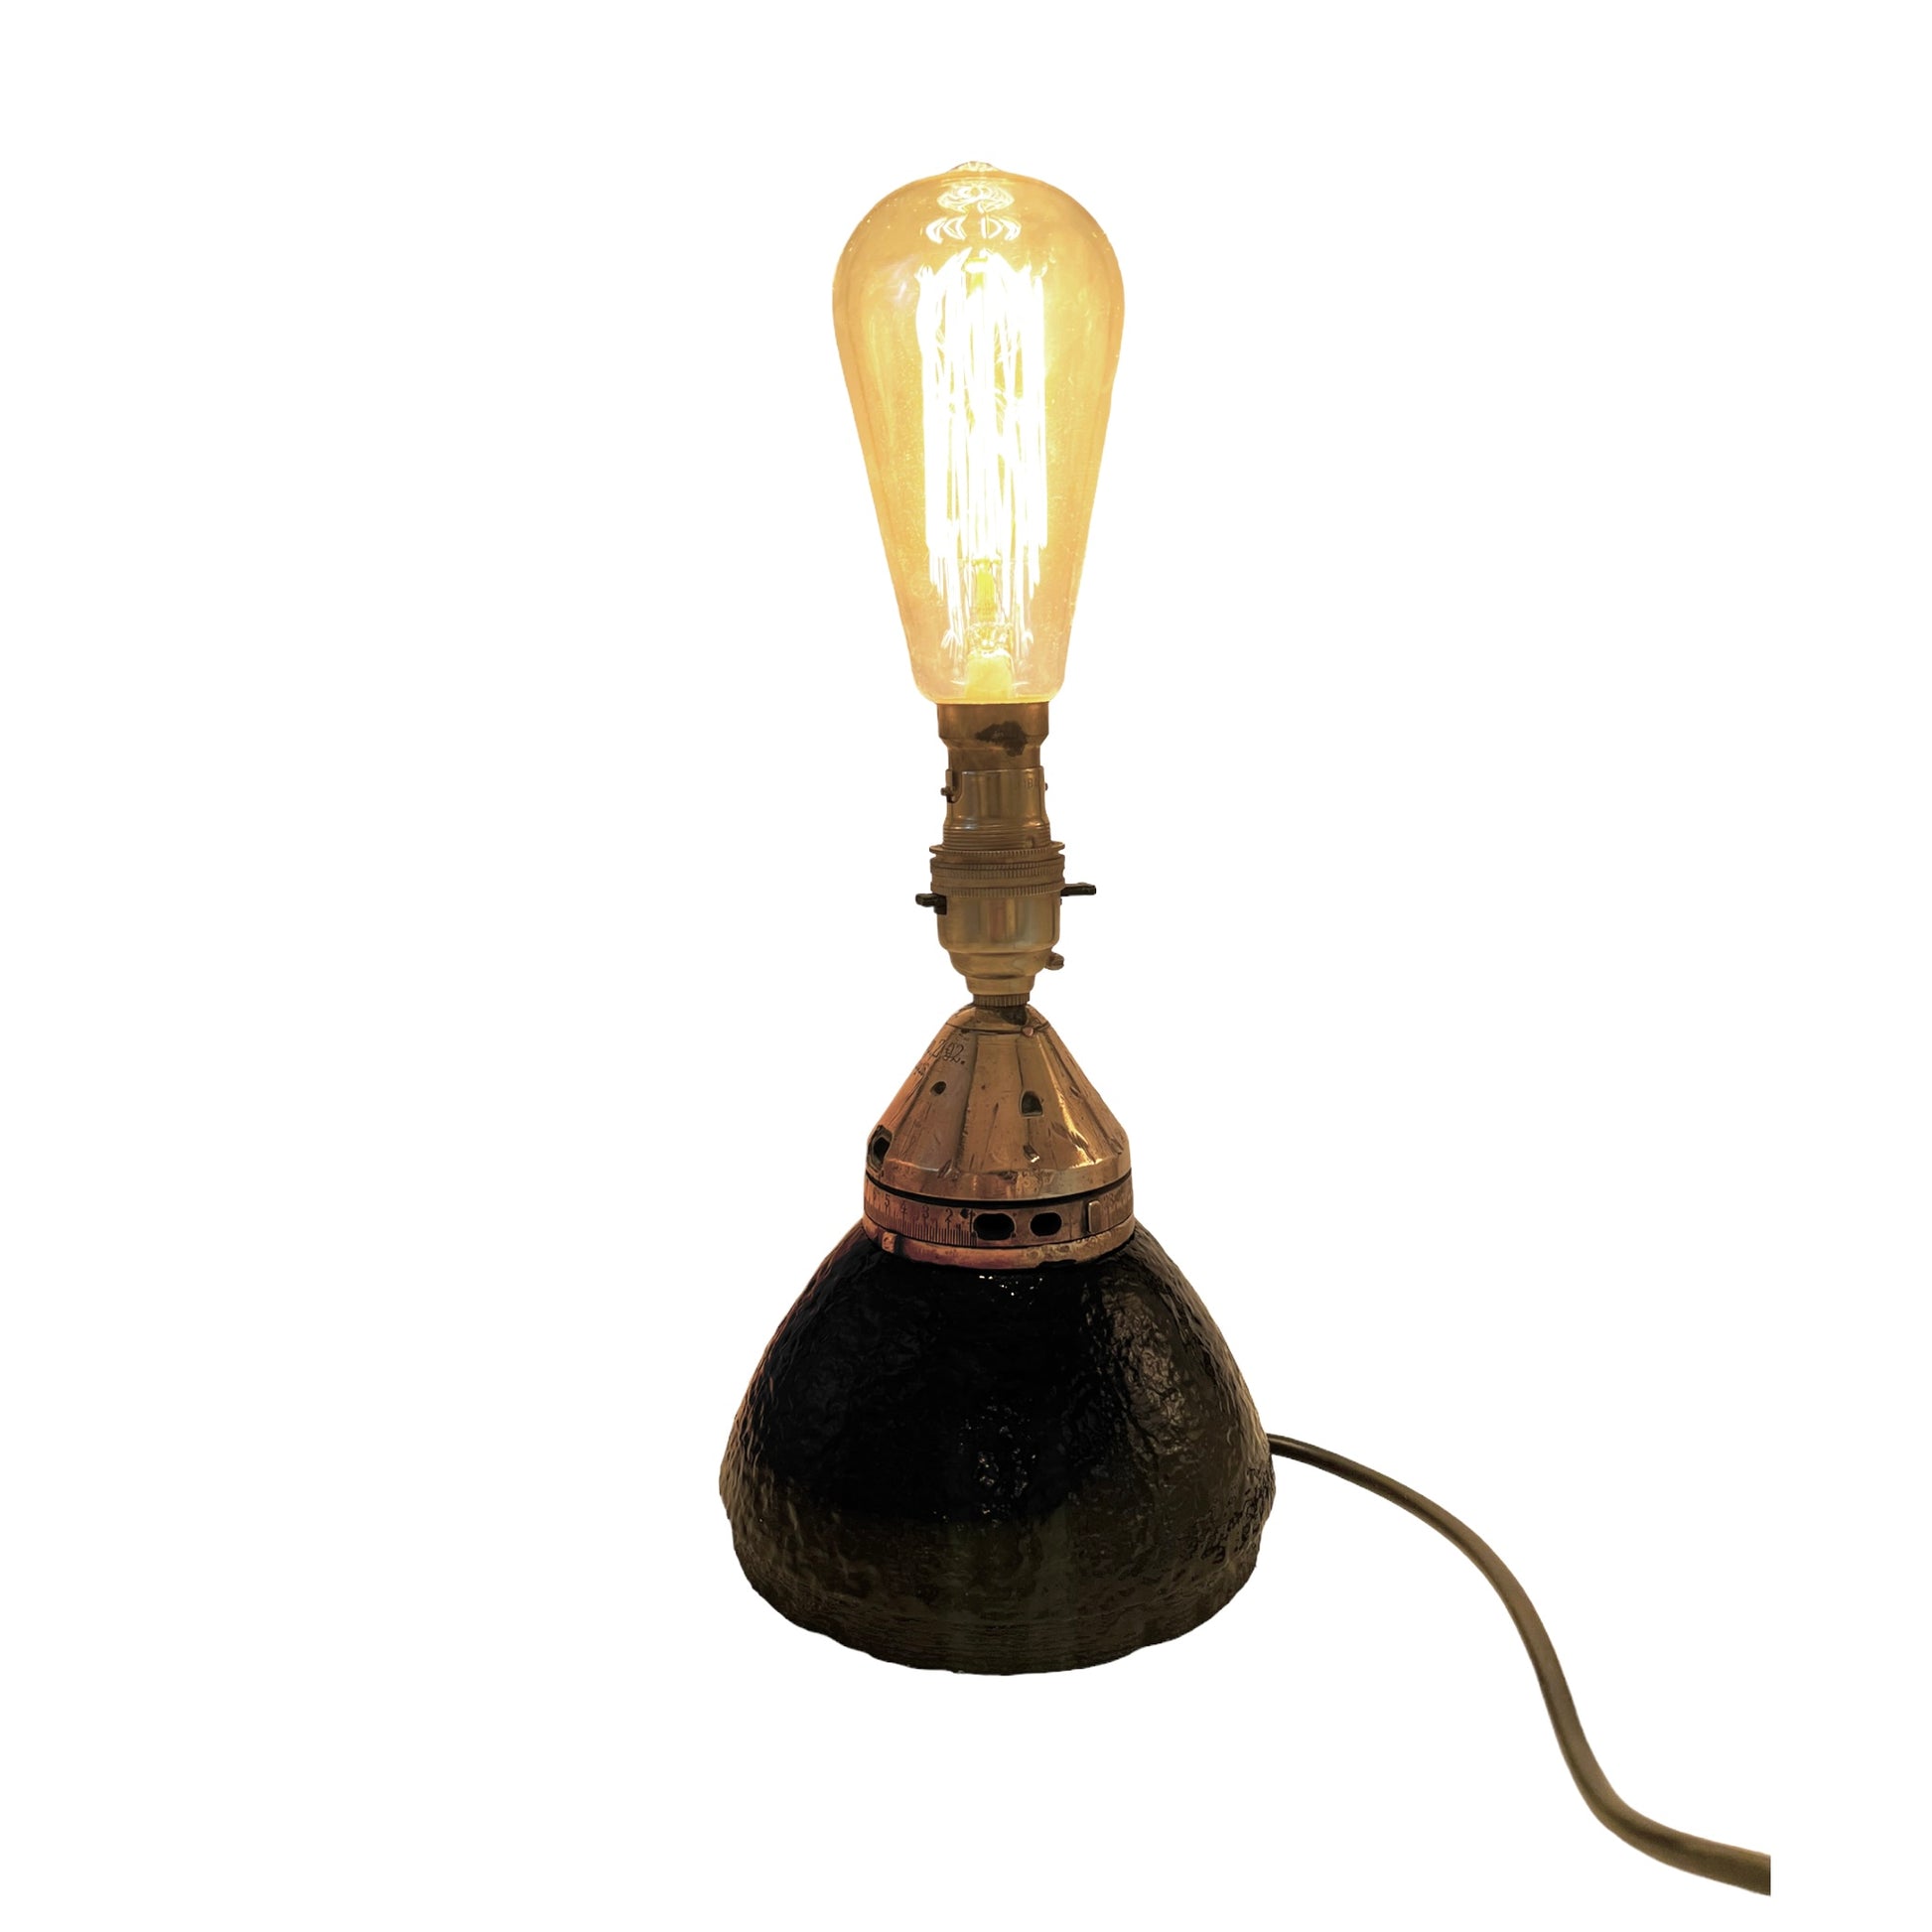 WW1 German Dopp Z fuse trench art desk lamp with free bulb sold by All Things French Store